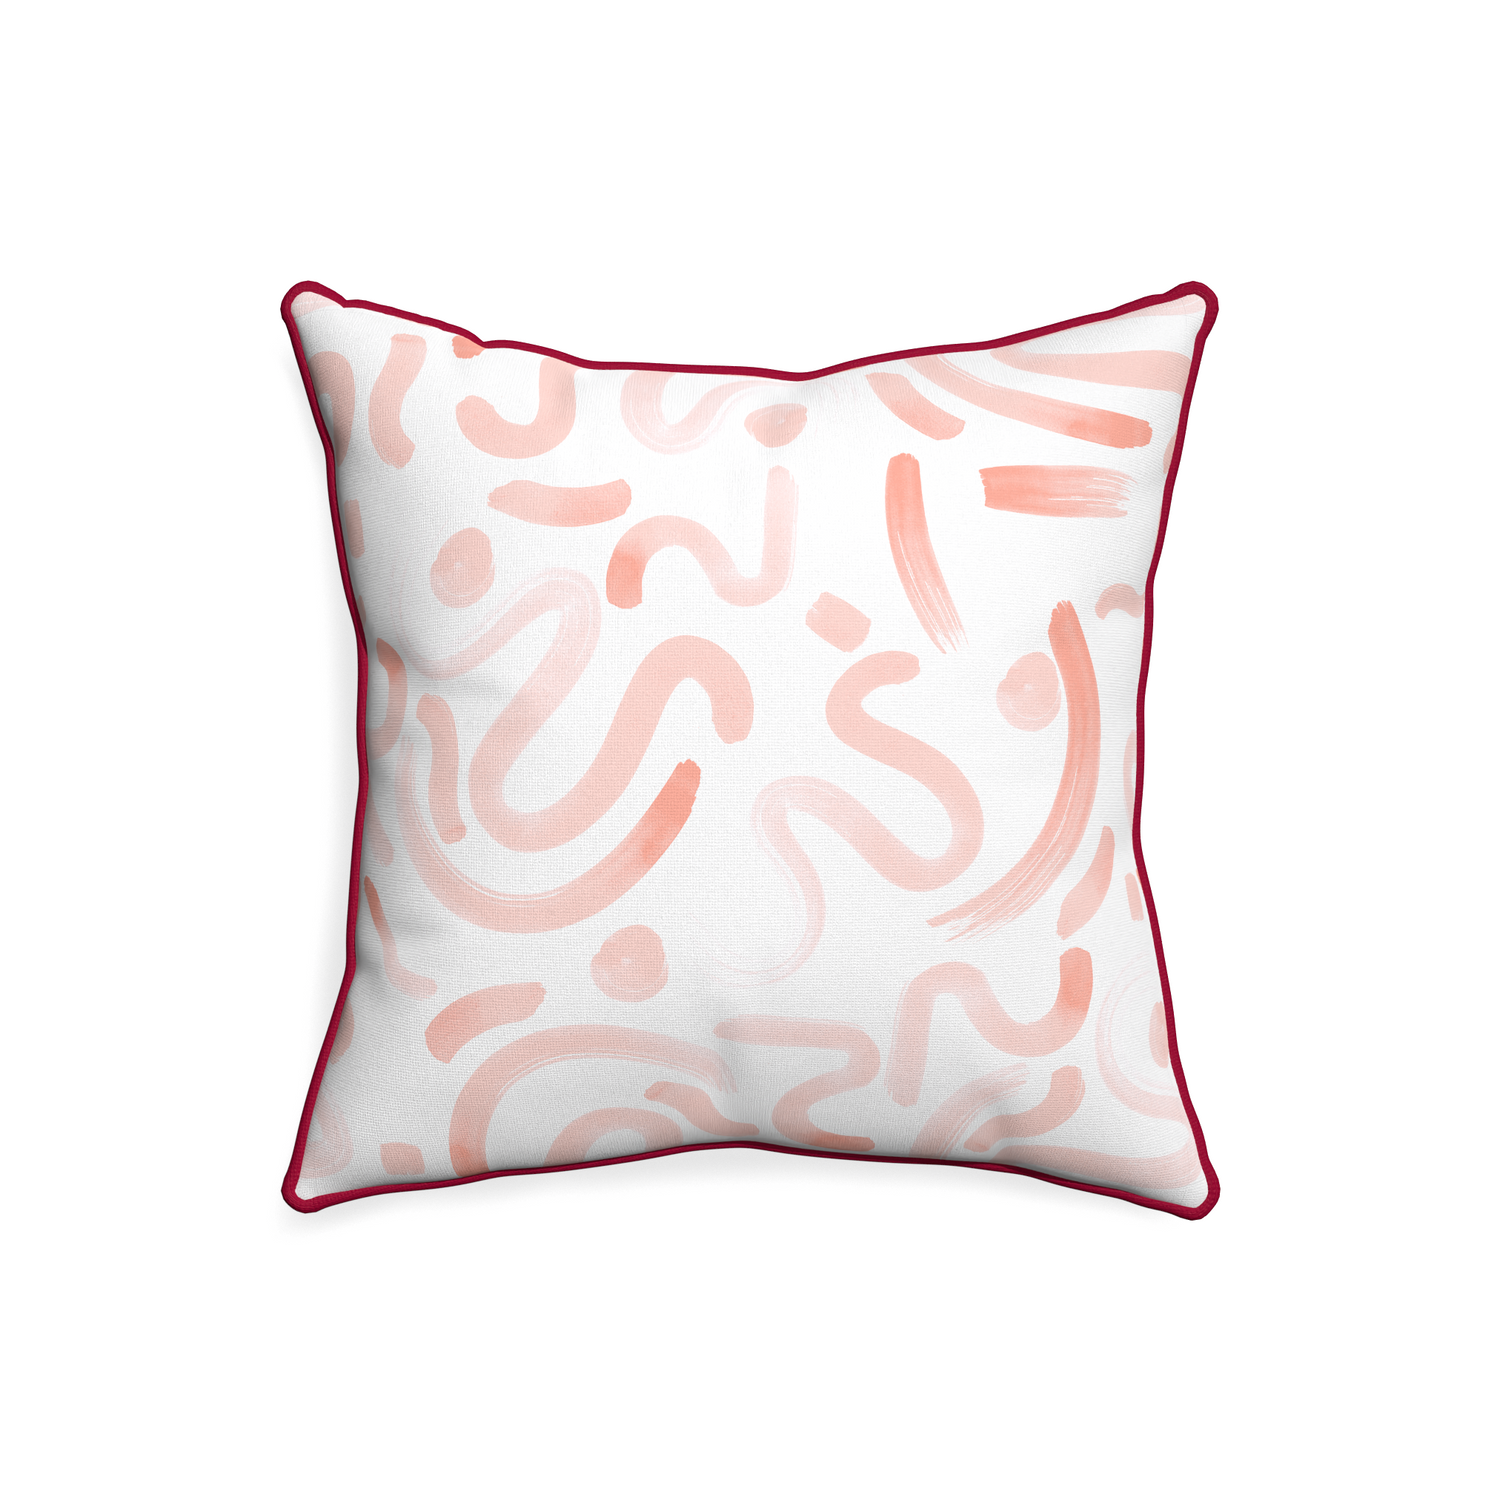 20-square hockney pink custom pink graphicpillow with raspberry piping on white background